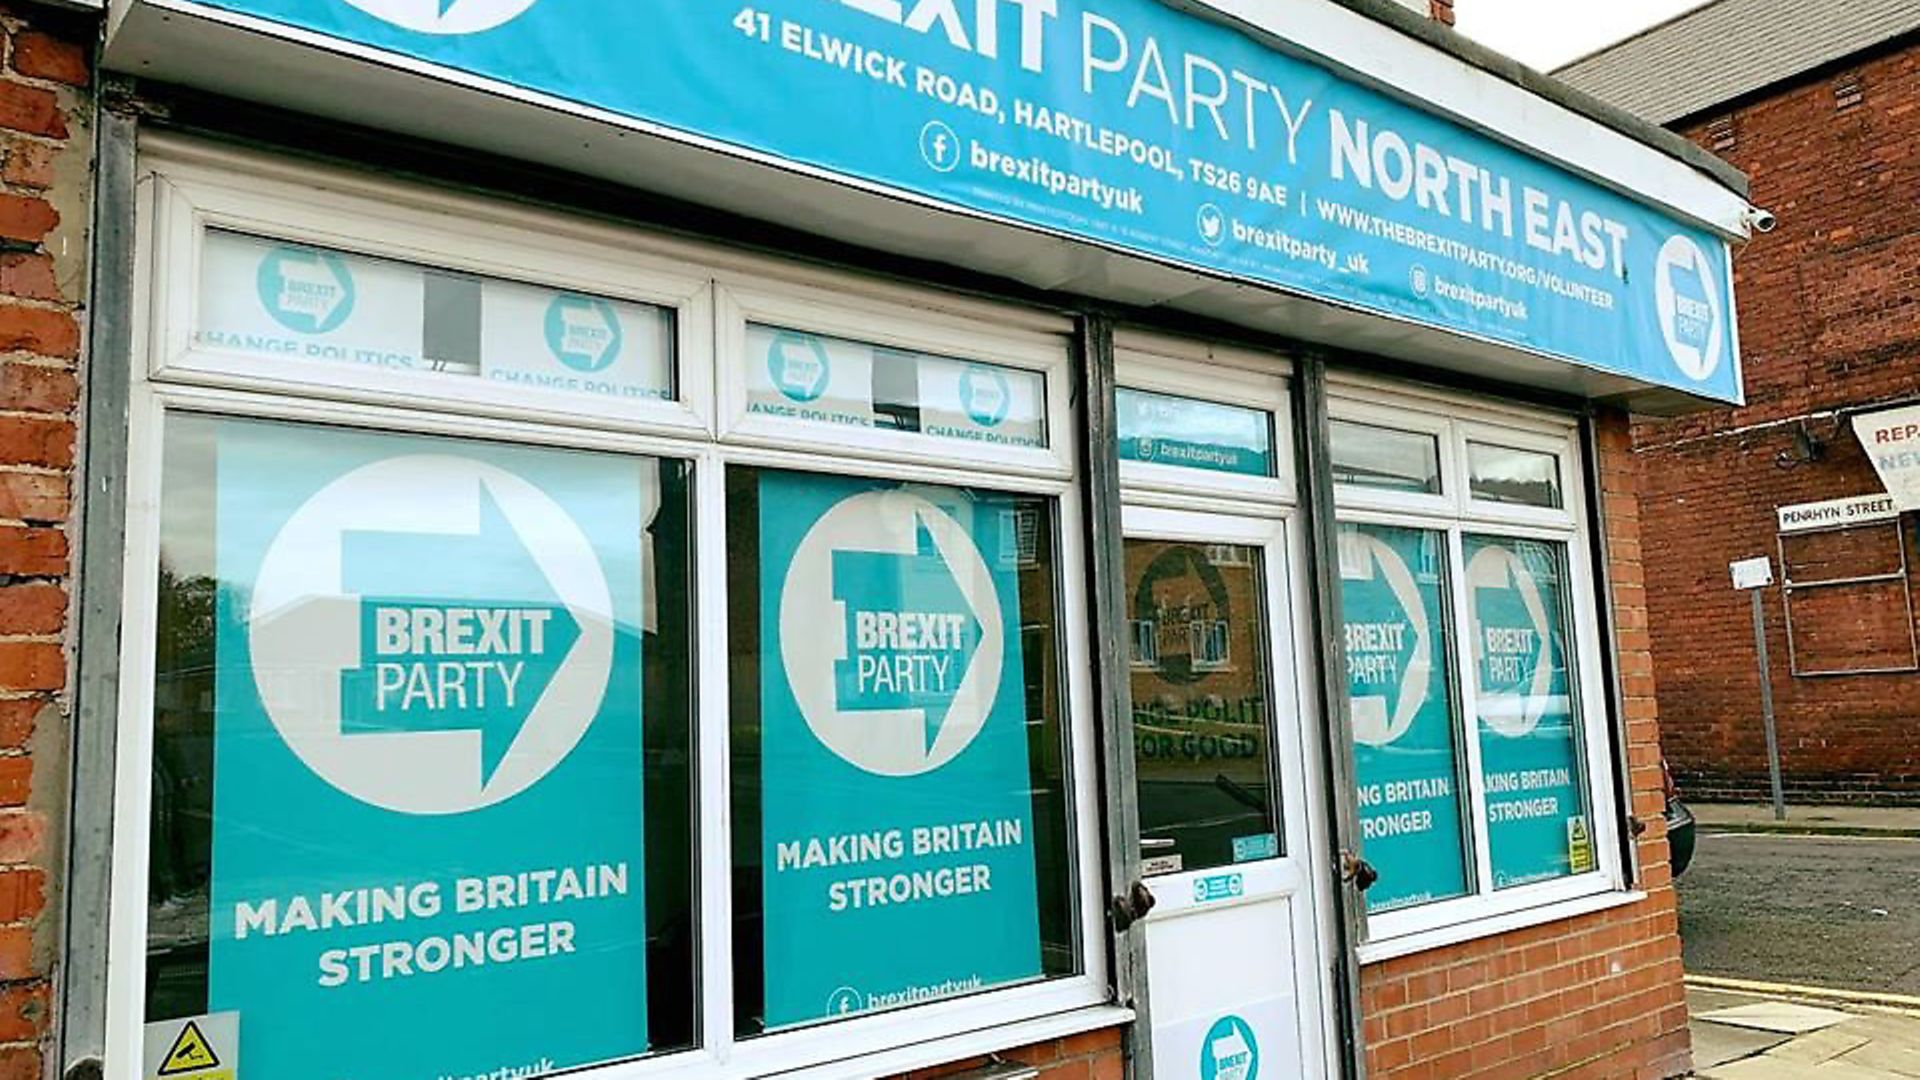 The Brexit Party North East campaign offices. Picture: Facebook - Credit: Facebook